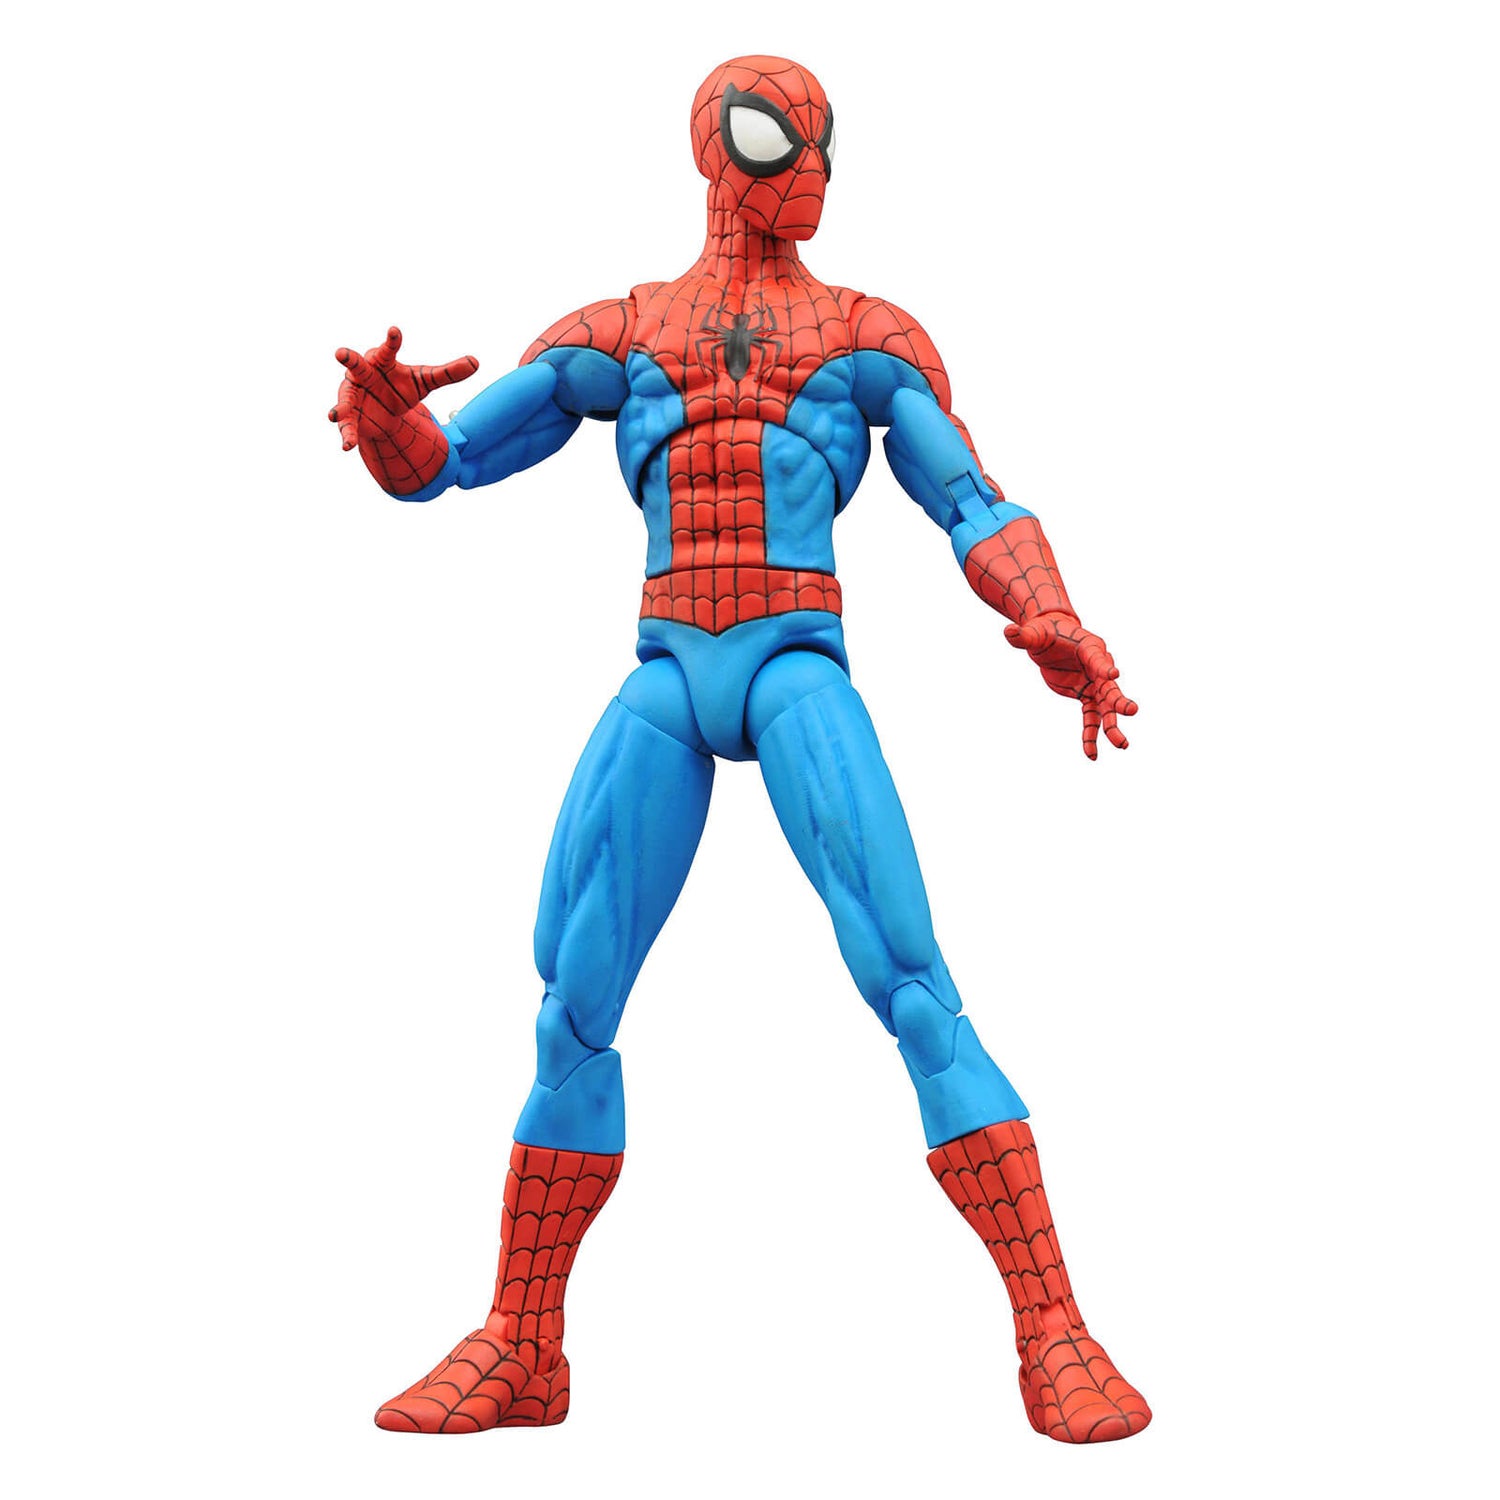 Diamond Select Marvel Select Spectacular Spider-Man Actionfigur